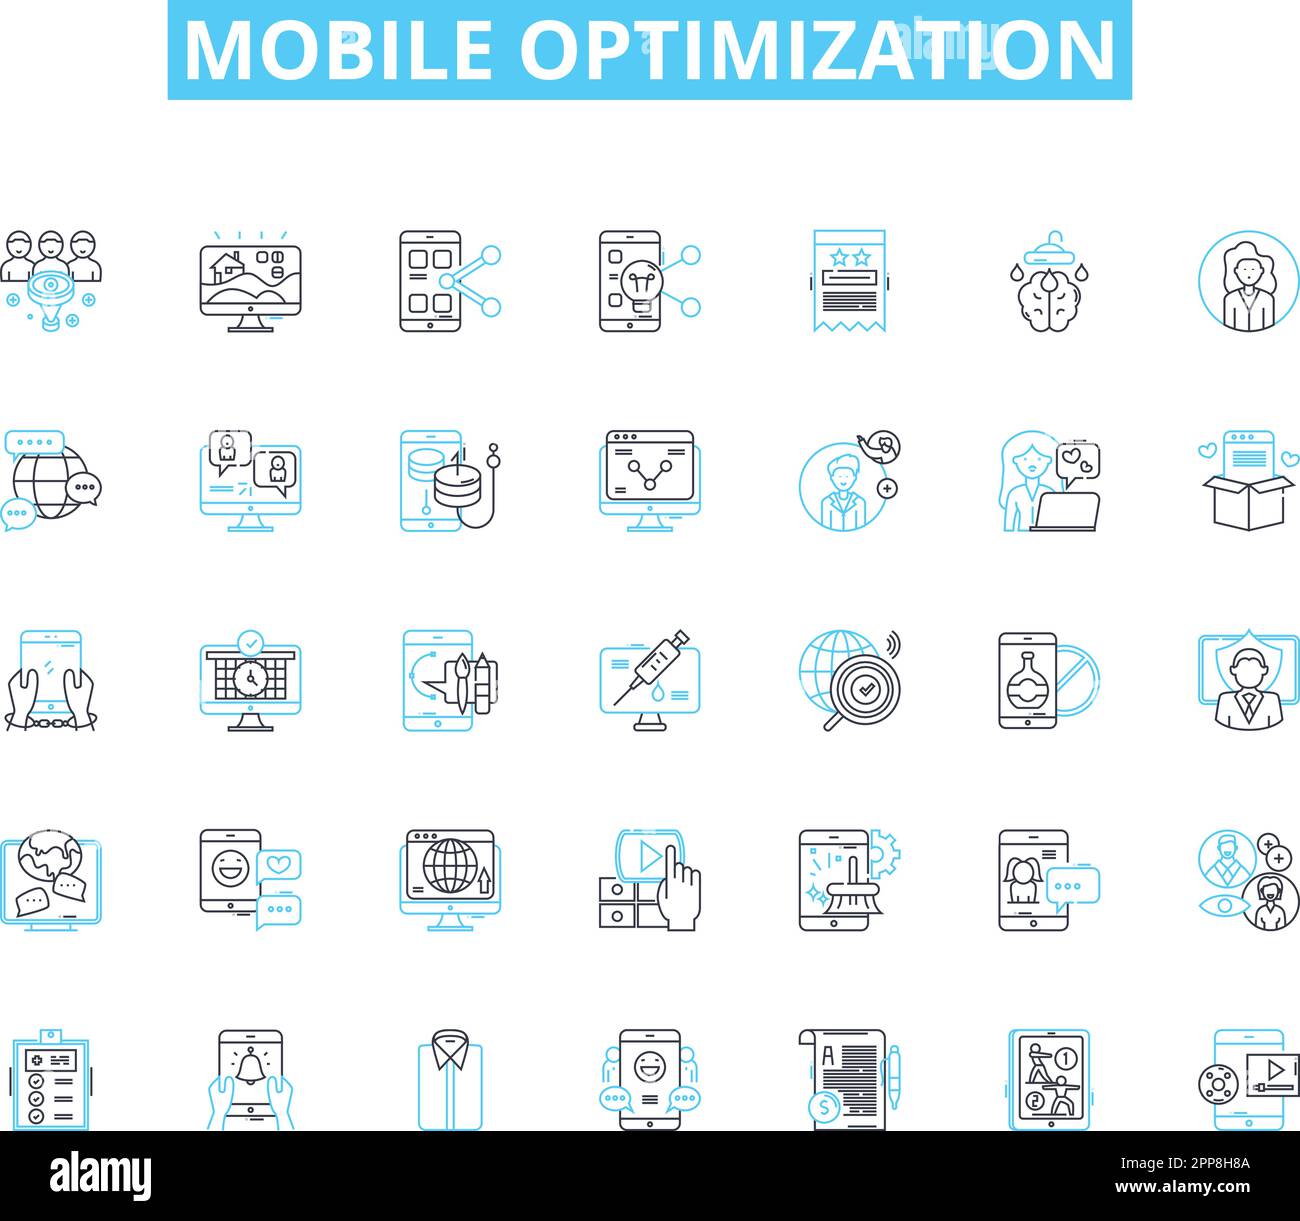 Mobile optimization linear icons set. Responsiveness, Compatibility, Adaptability, Streamlining, Efficiency, Accessibility, User-friendliness line Stock Vector